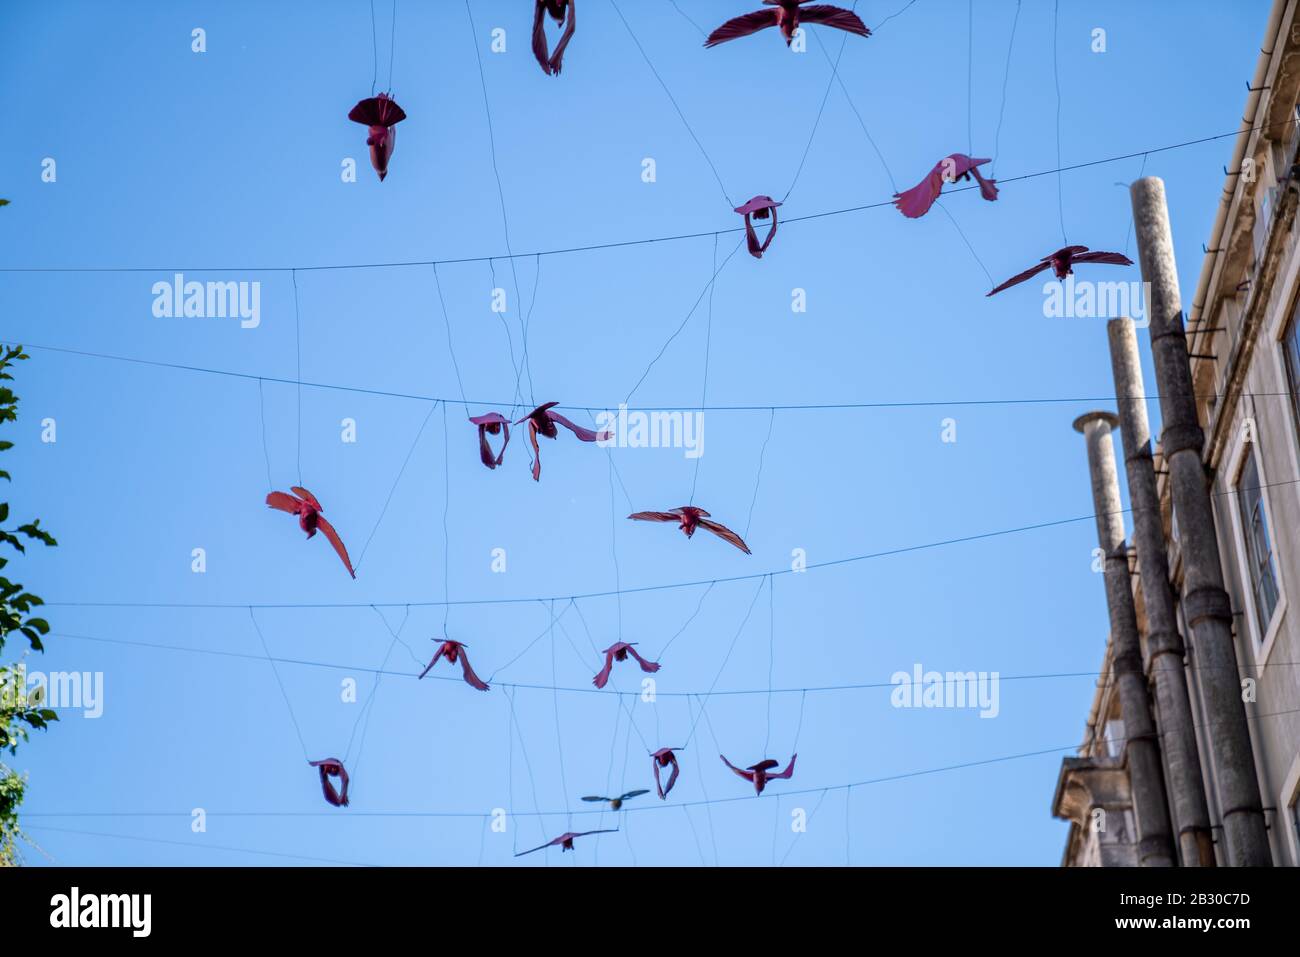 Decorative paper birds hanging on strings high on buildings against sky Stock Photo